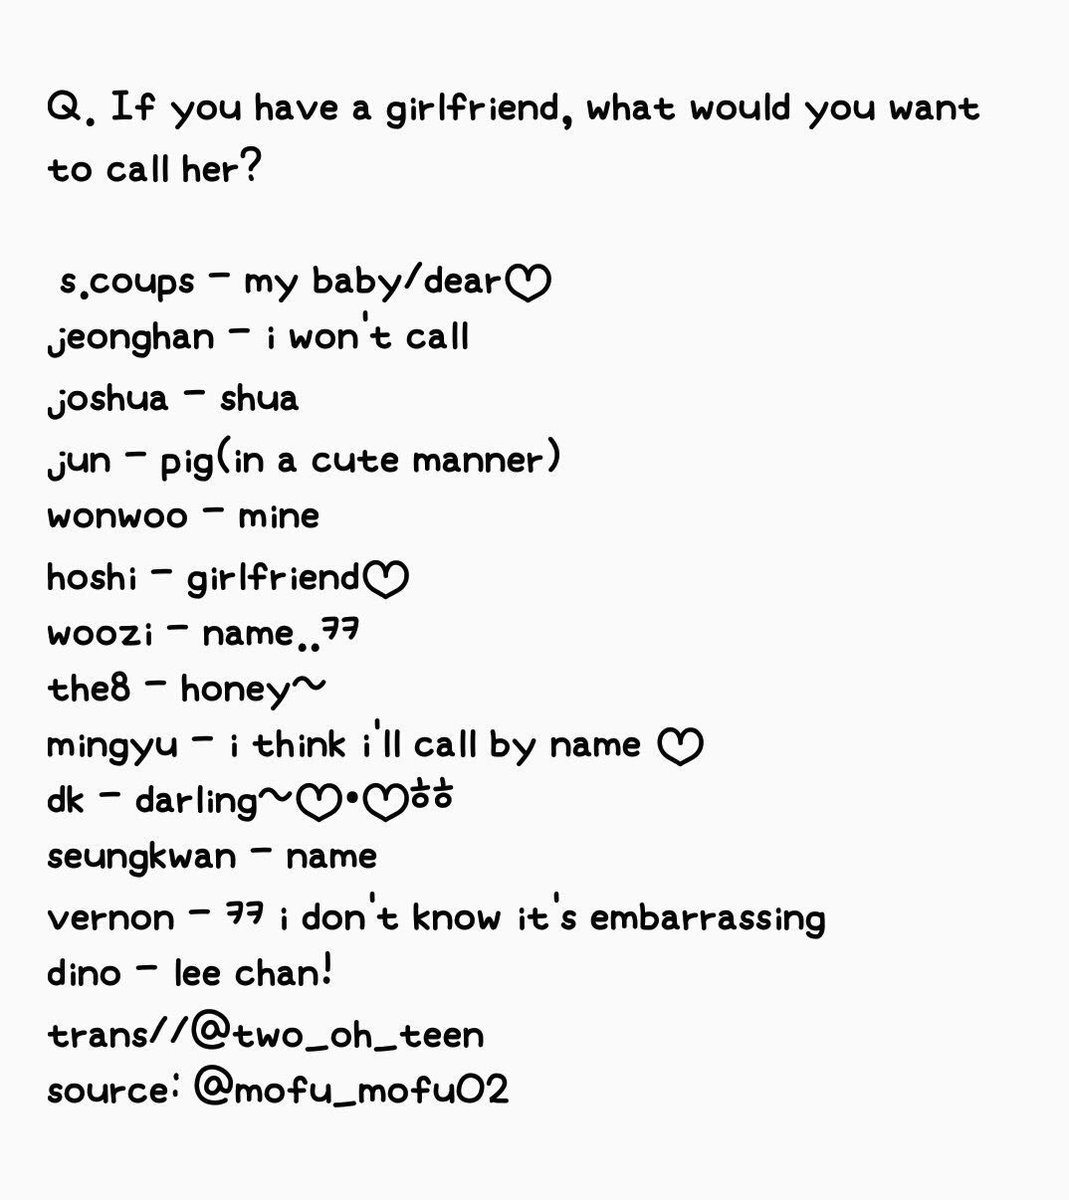 â€œQ: iF YOU HAVE A GIRLFRIEND, WHAT WOULD YOU WANT TO CALL HER?
HOSH...